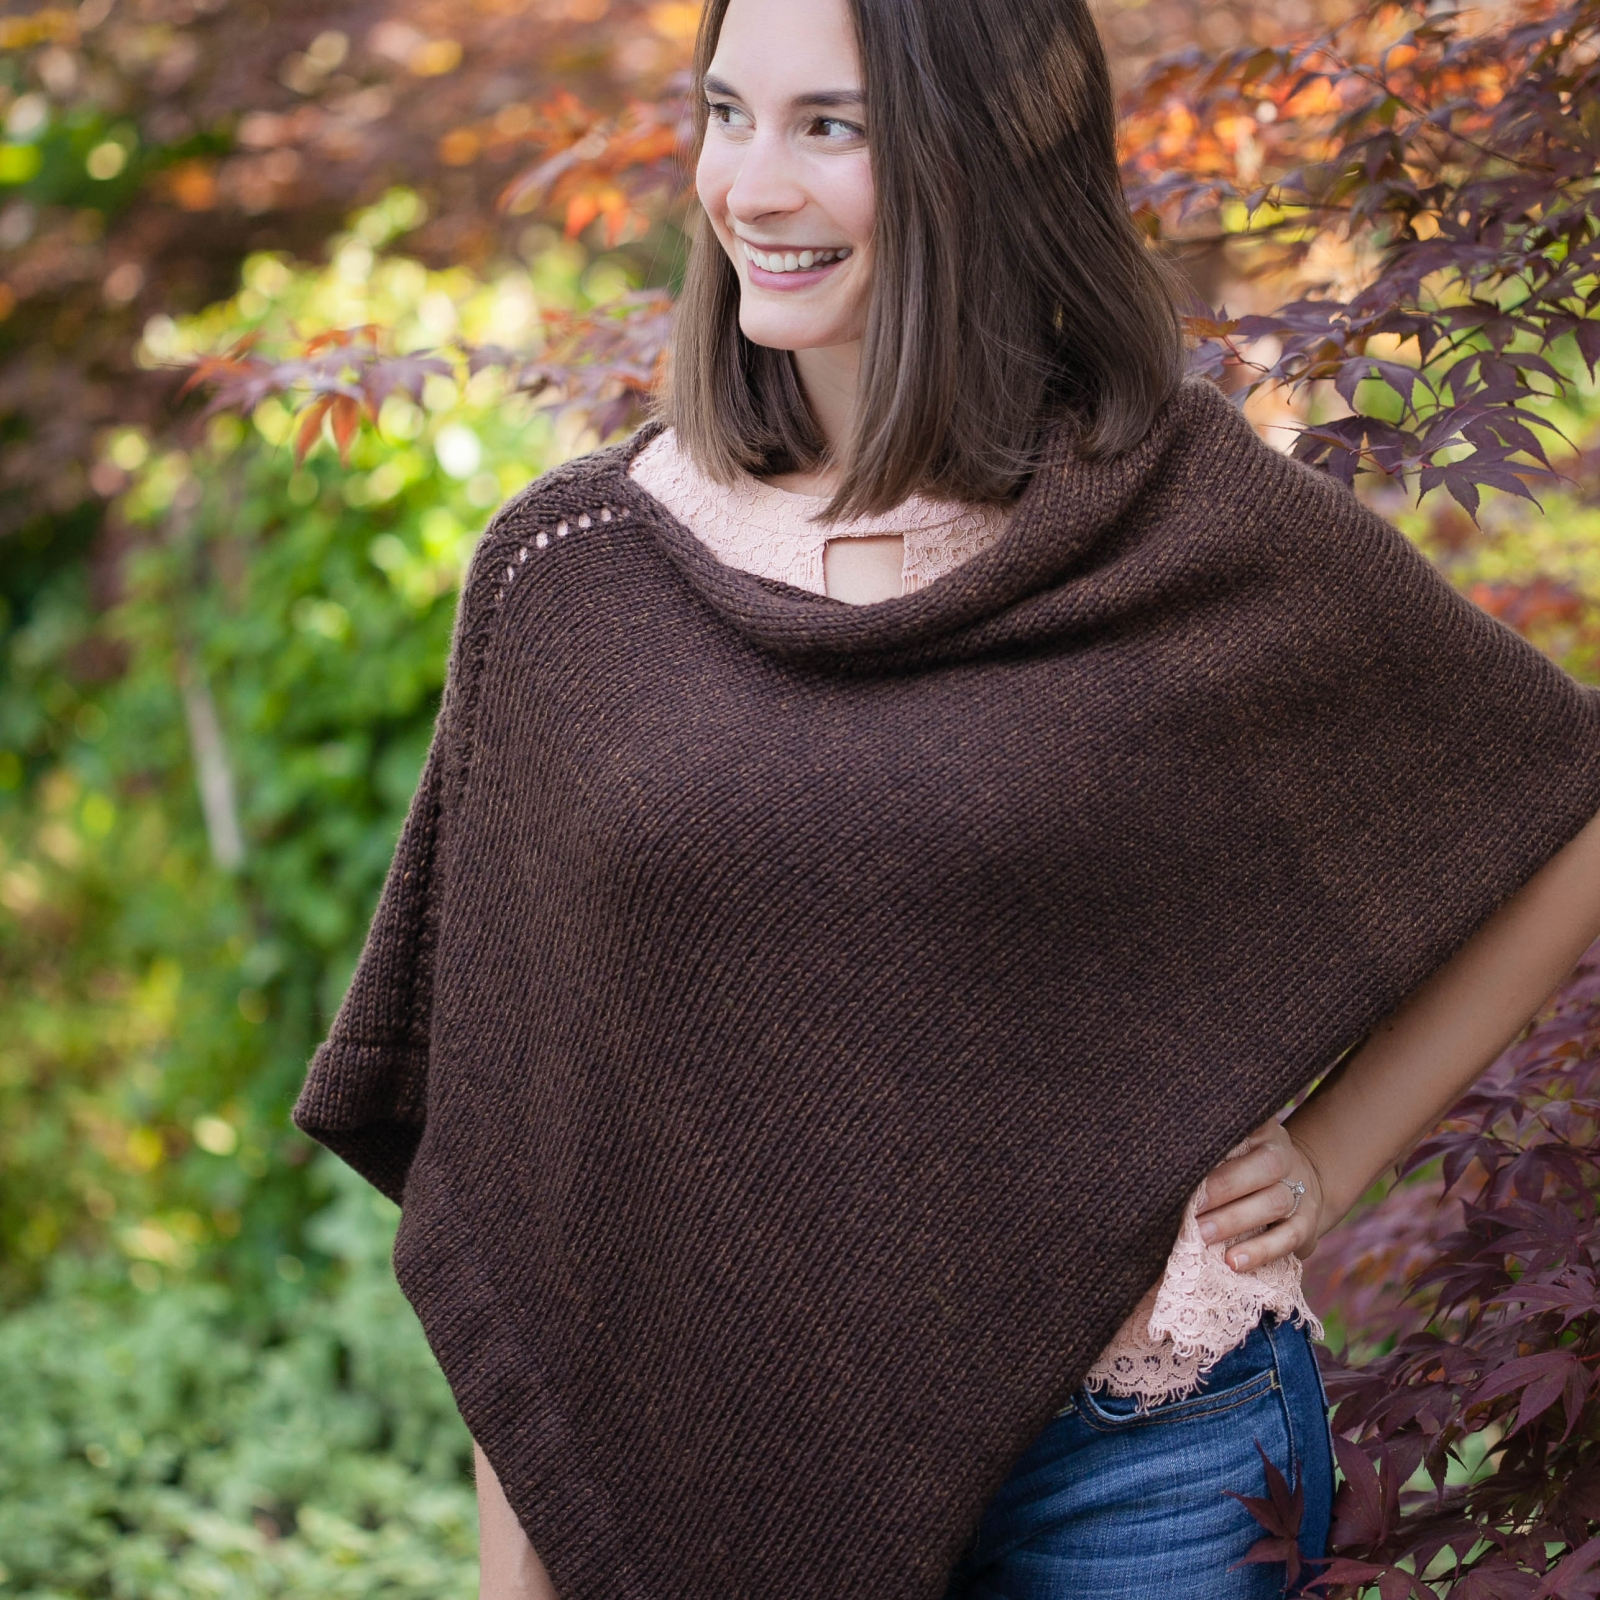 Poncho Pattern Knit Loom Knit Poncho Pattern The Rebecca Poncho Has An Elegant Design And Is Loom Knit From One Rectangle Easy Fold Cape Design Pdf Pattern Download